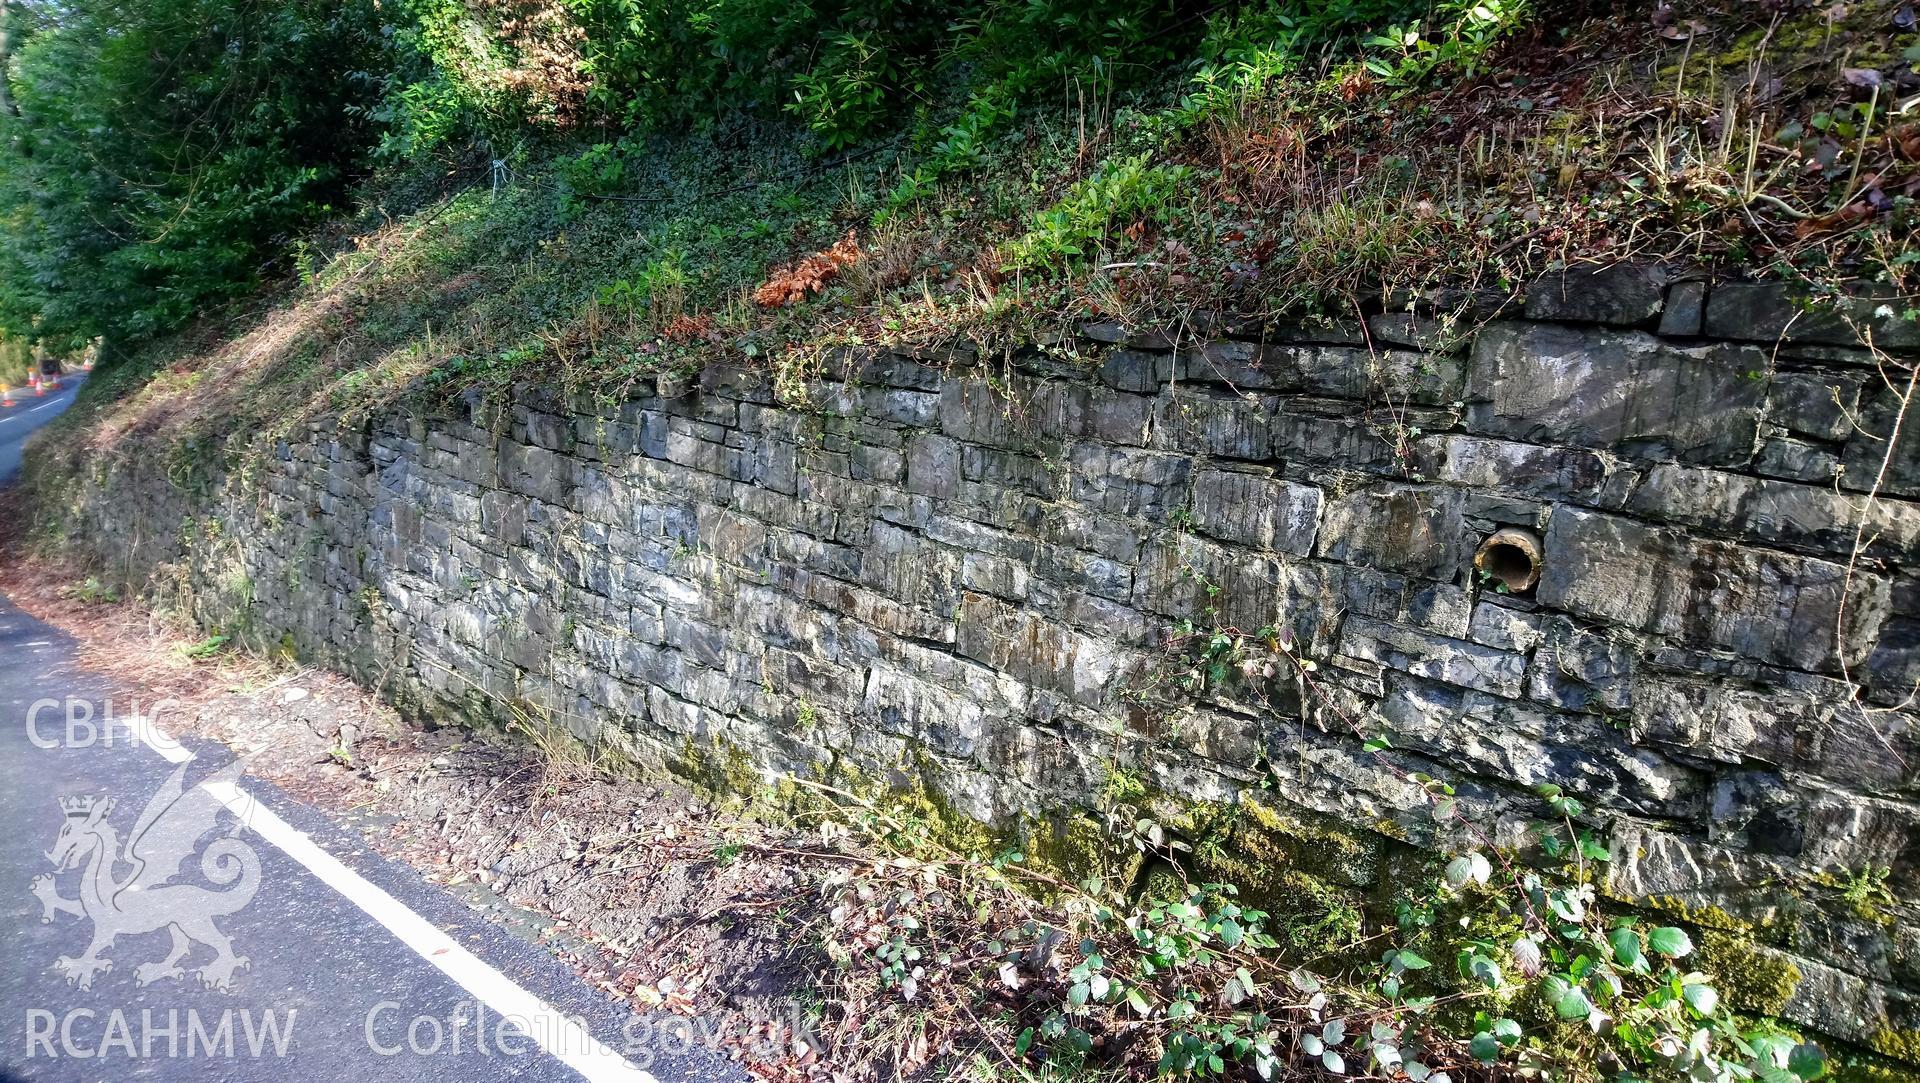 Photographs taken on 15th March 2018 of historic retaining wall at Castle Hill, Llanilar, built of local sandstone blocks closely replicating the appearance of the original Roman walls of the Abermagwr Roman villa which were built of the same stone.